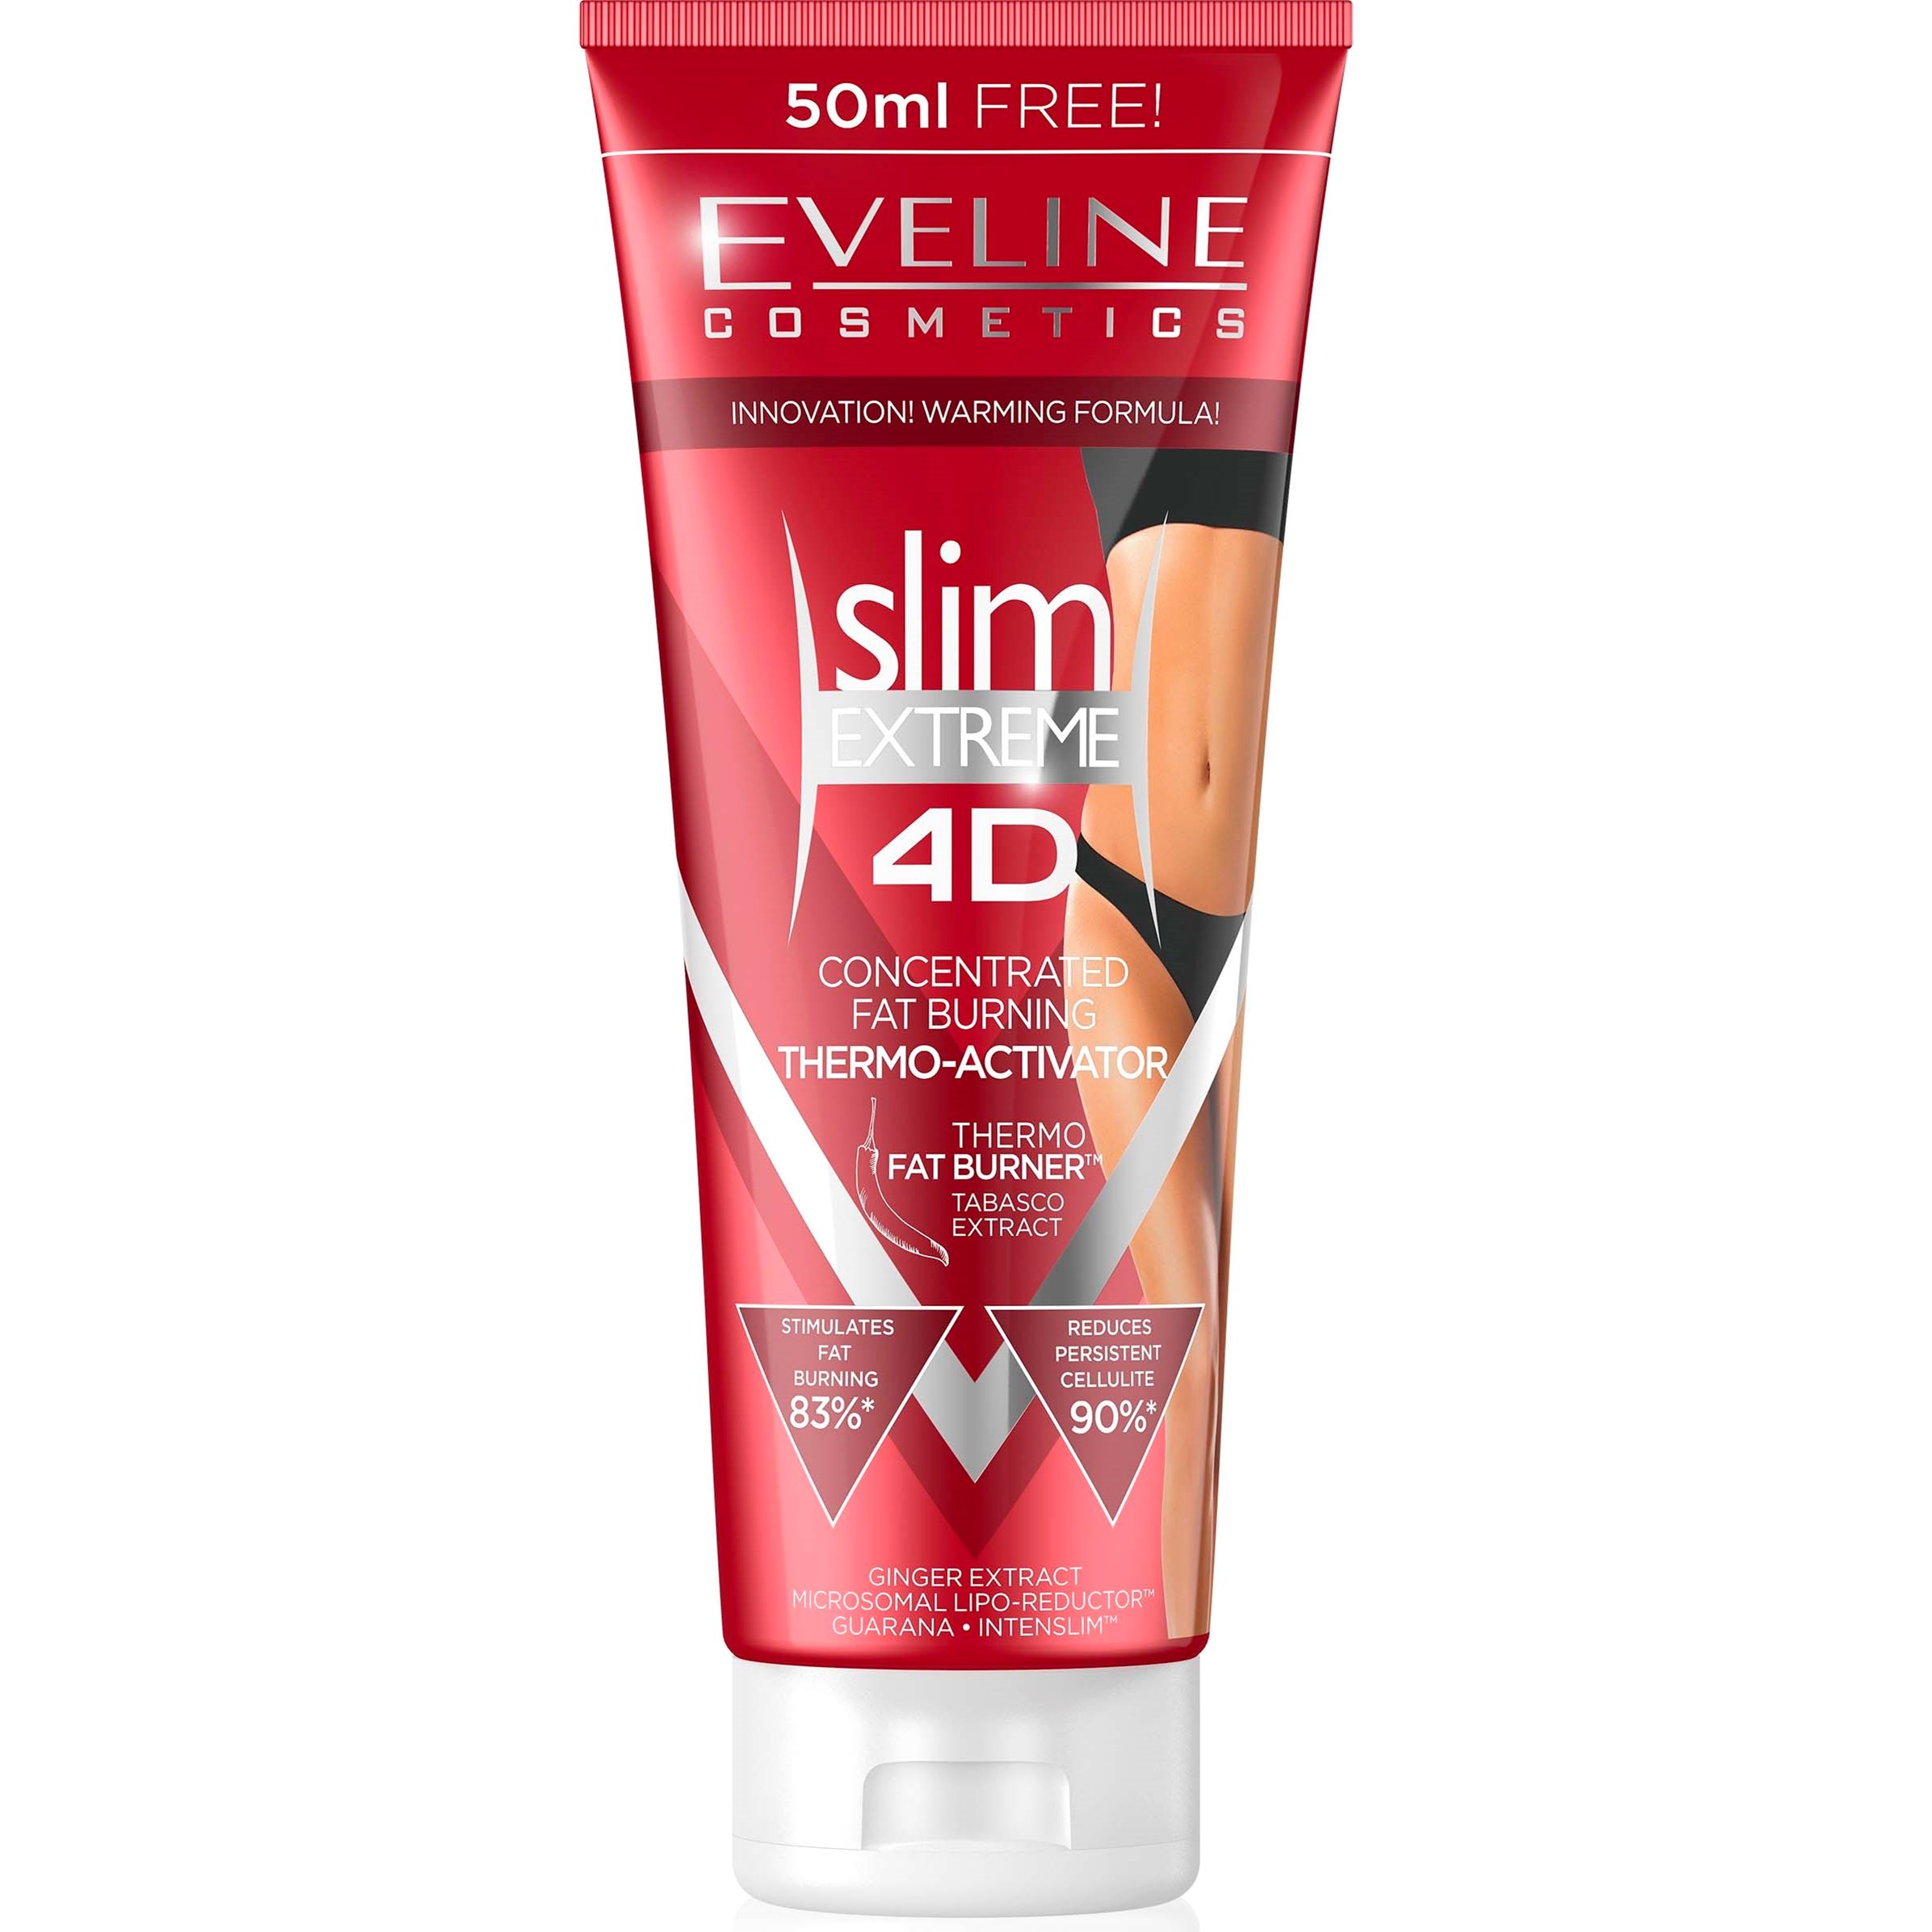 Eveline Cosmetics Slim Extreme 4d Concentrated Fat Burning Thermo-Acti